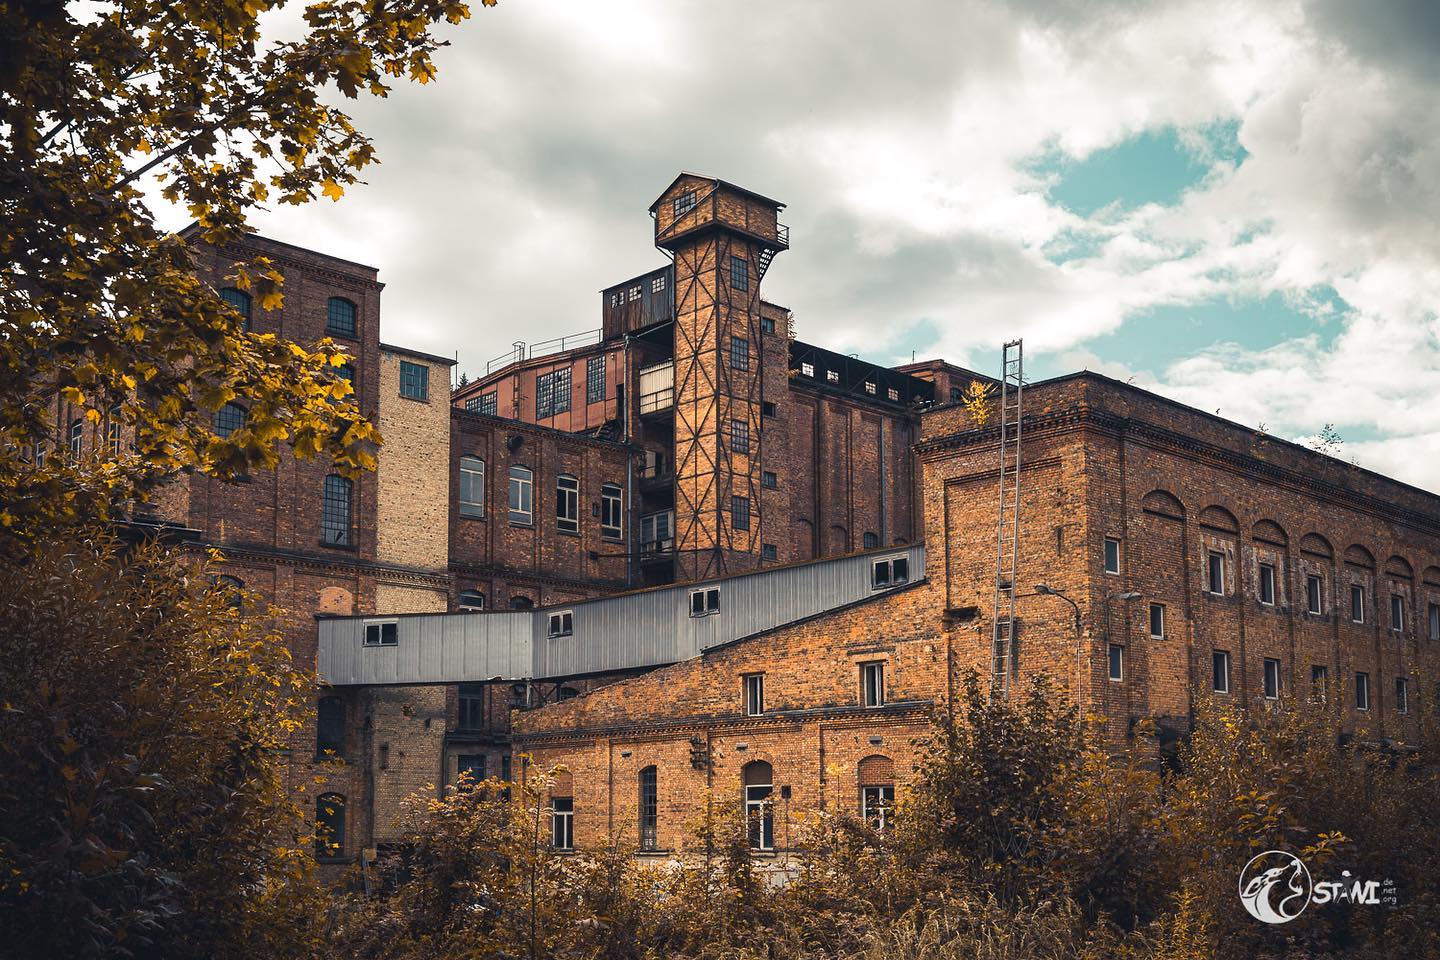 Old Factory #nikond750?